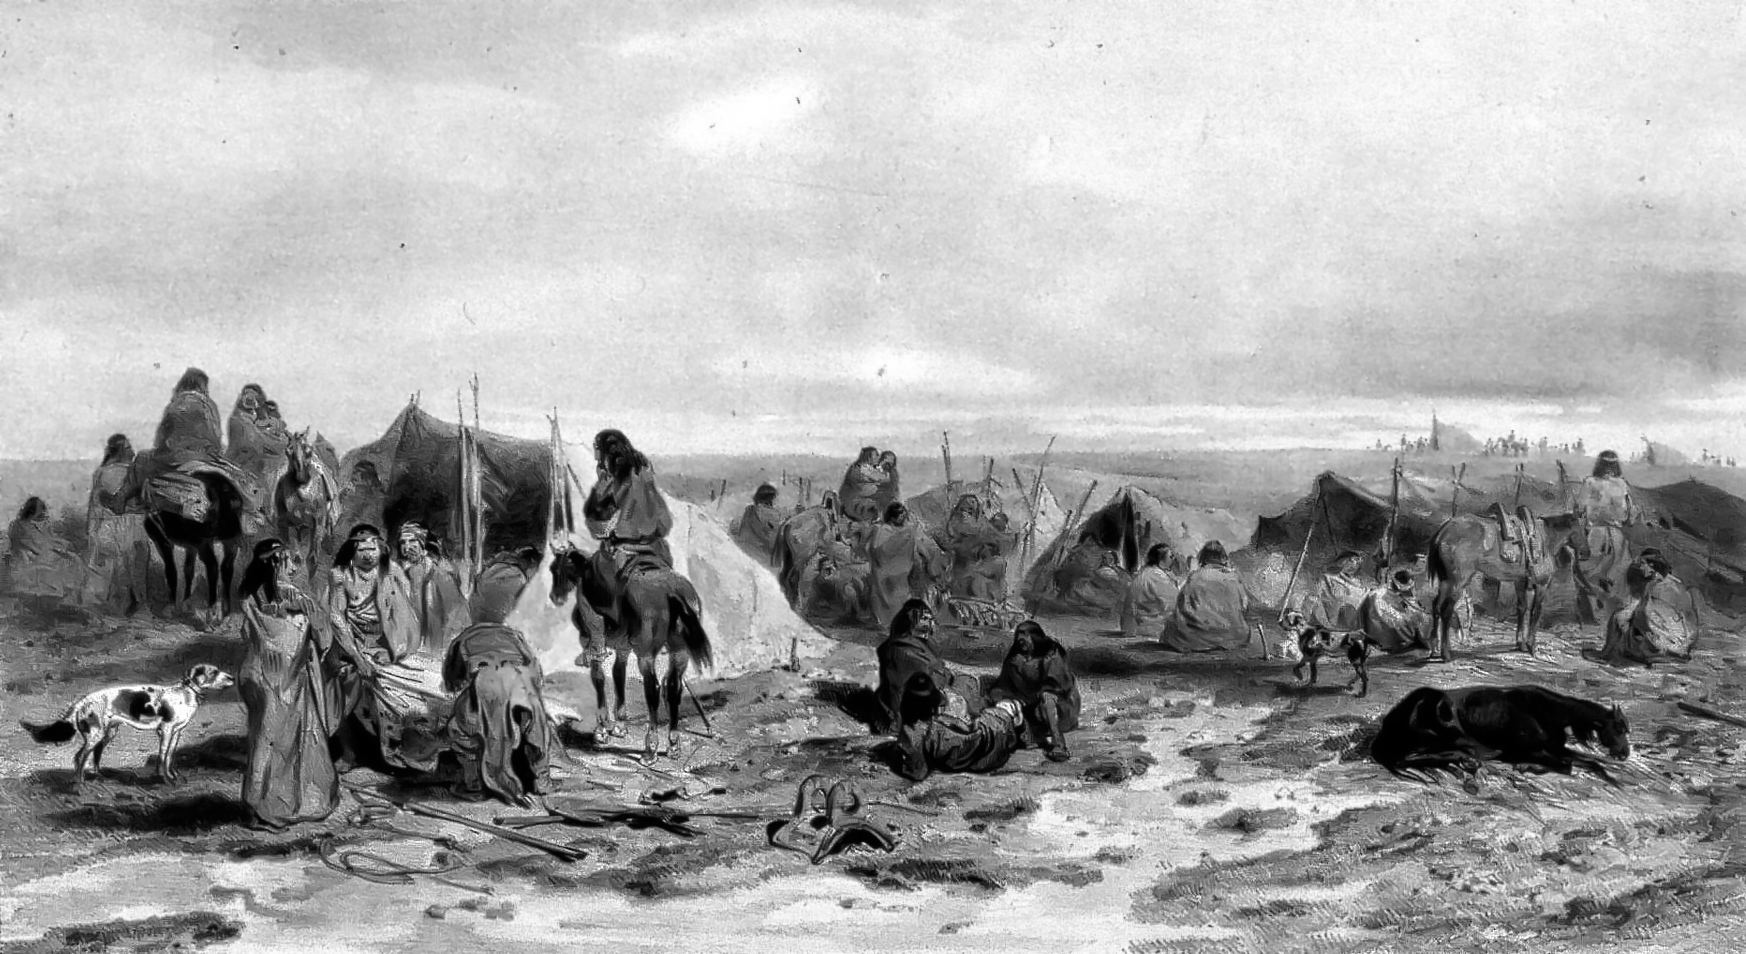 An illustration of a Patagonian encampment; from an account by French explorer Jules Dumont d'Urville (1840s).